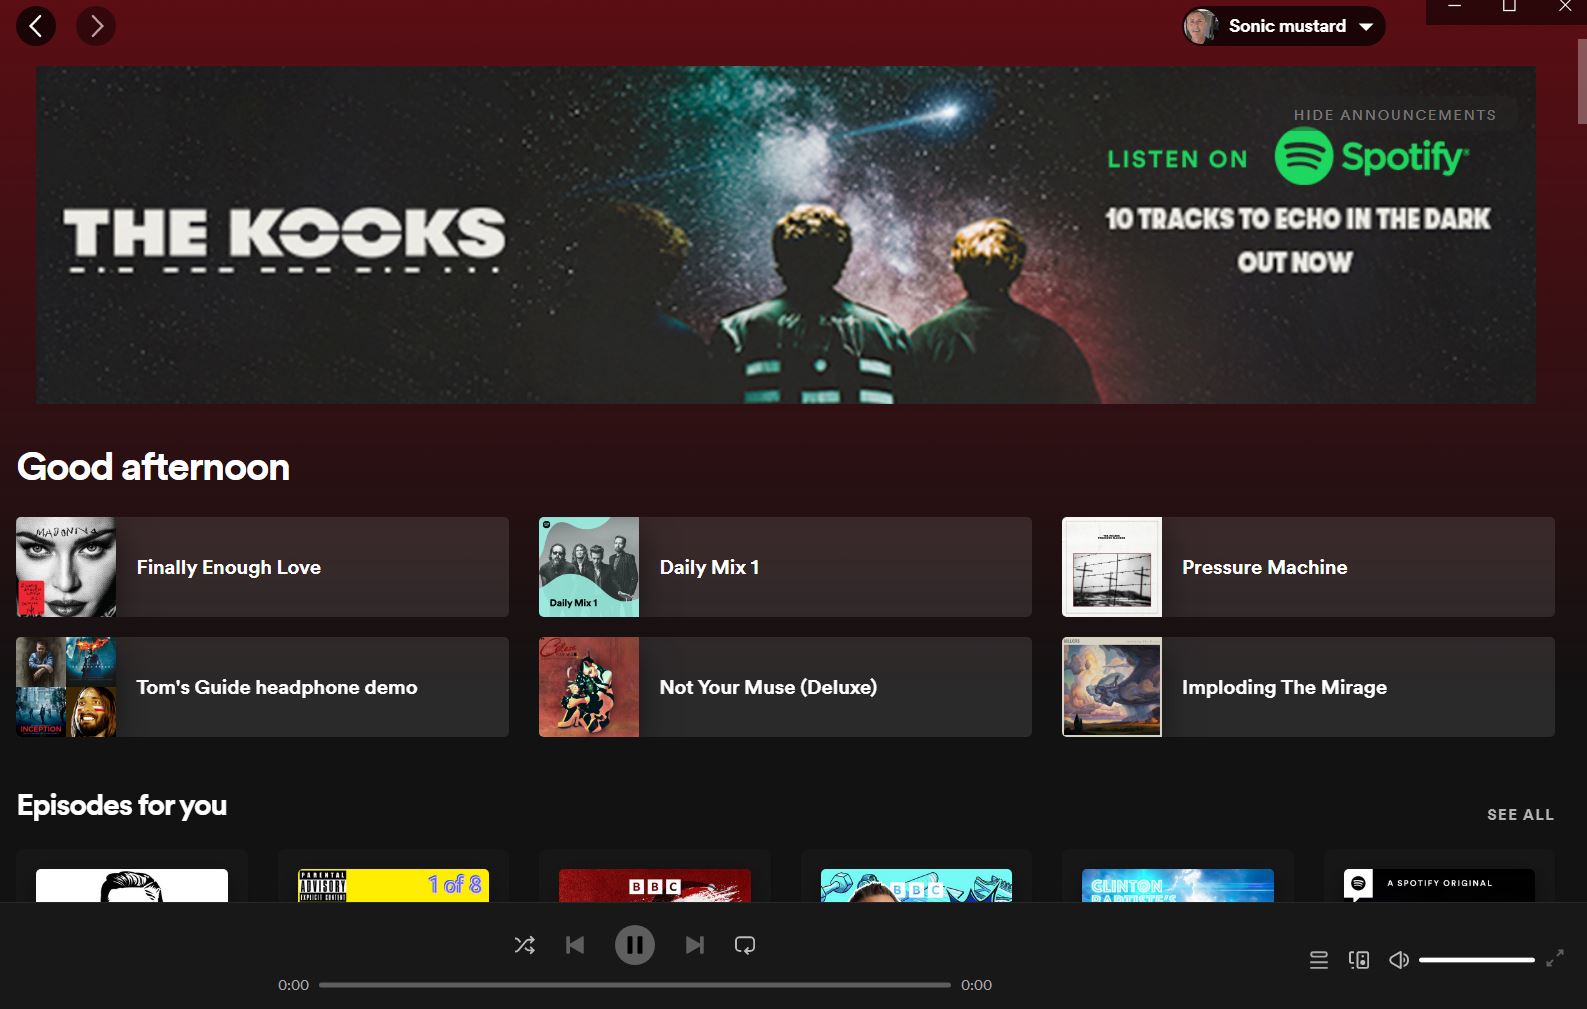 How to upload music to Spotify Tom's Guide